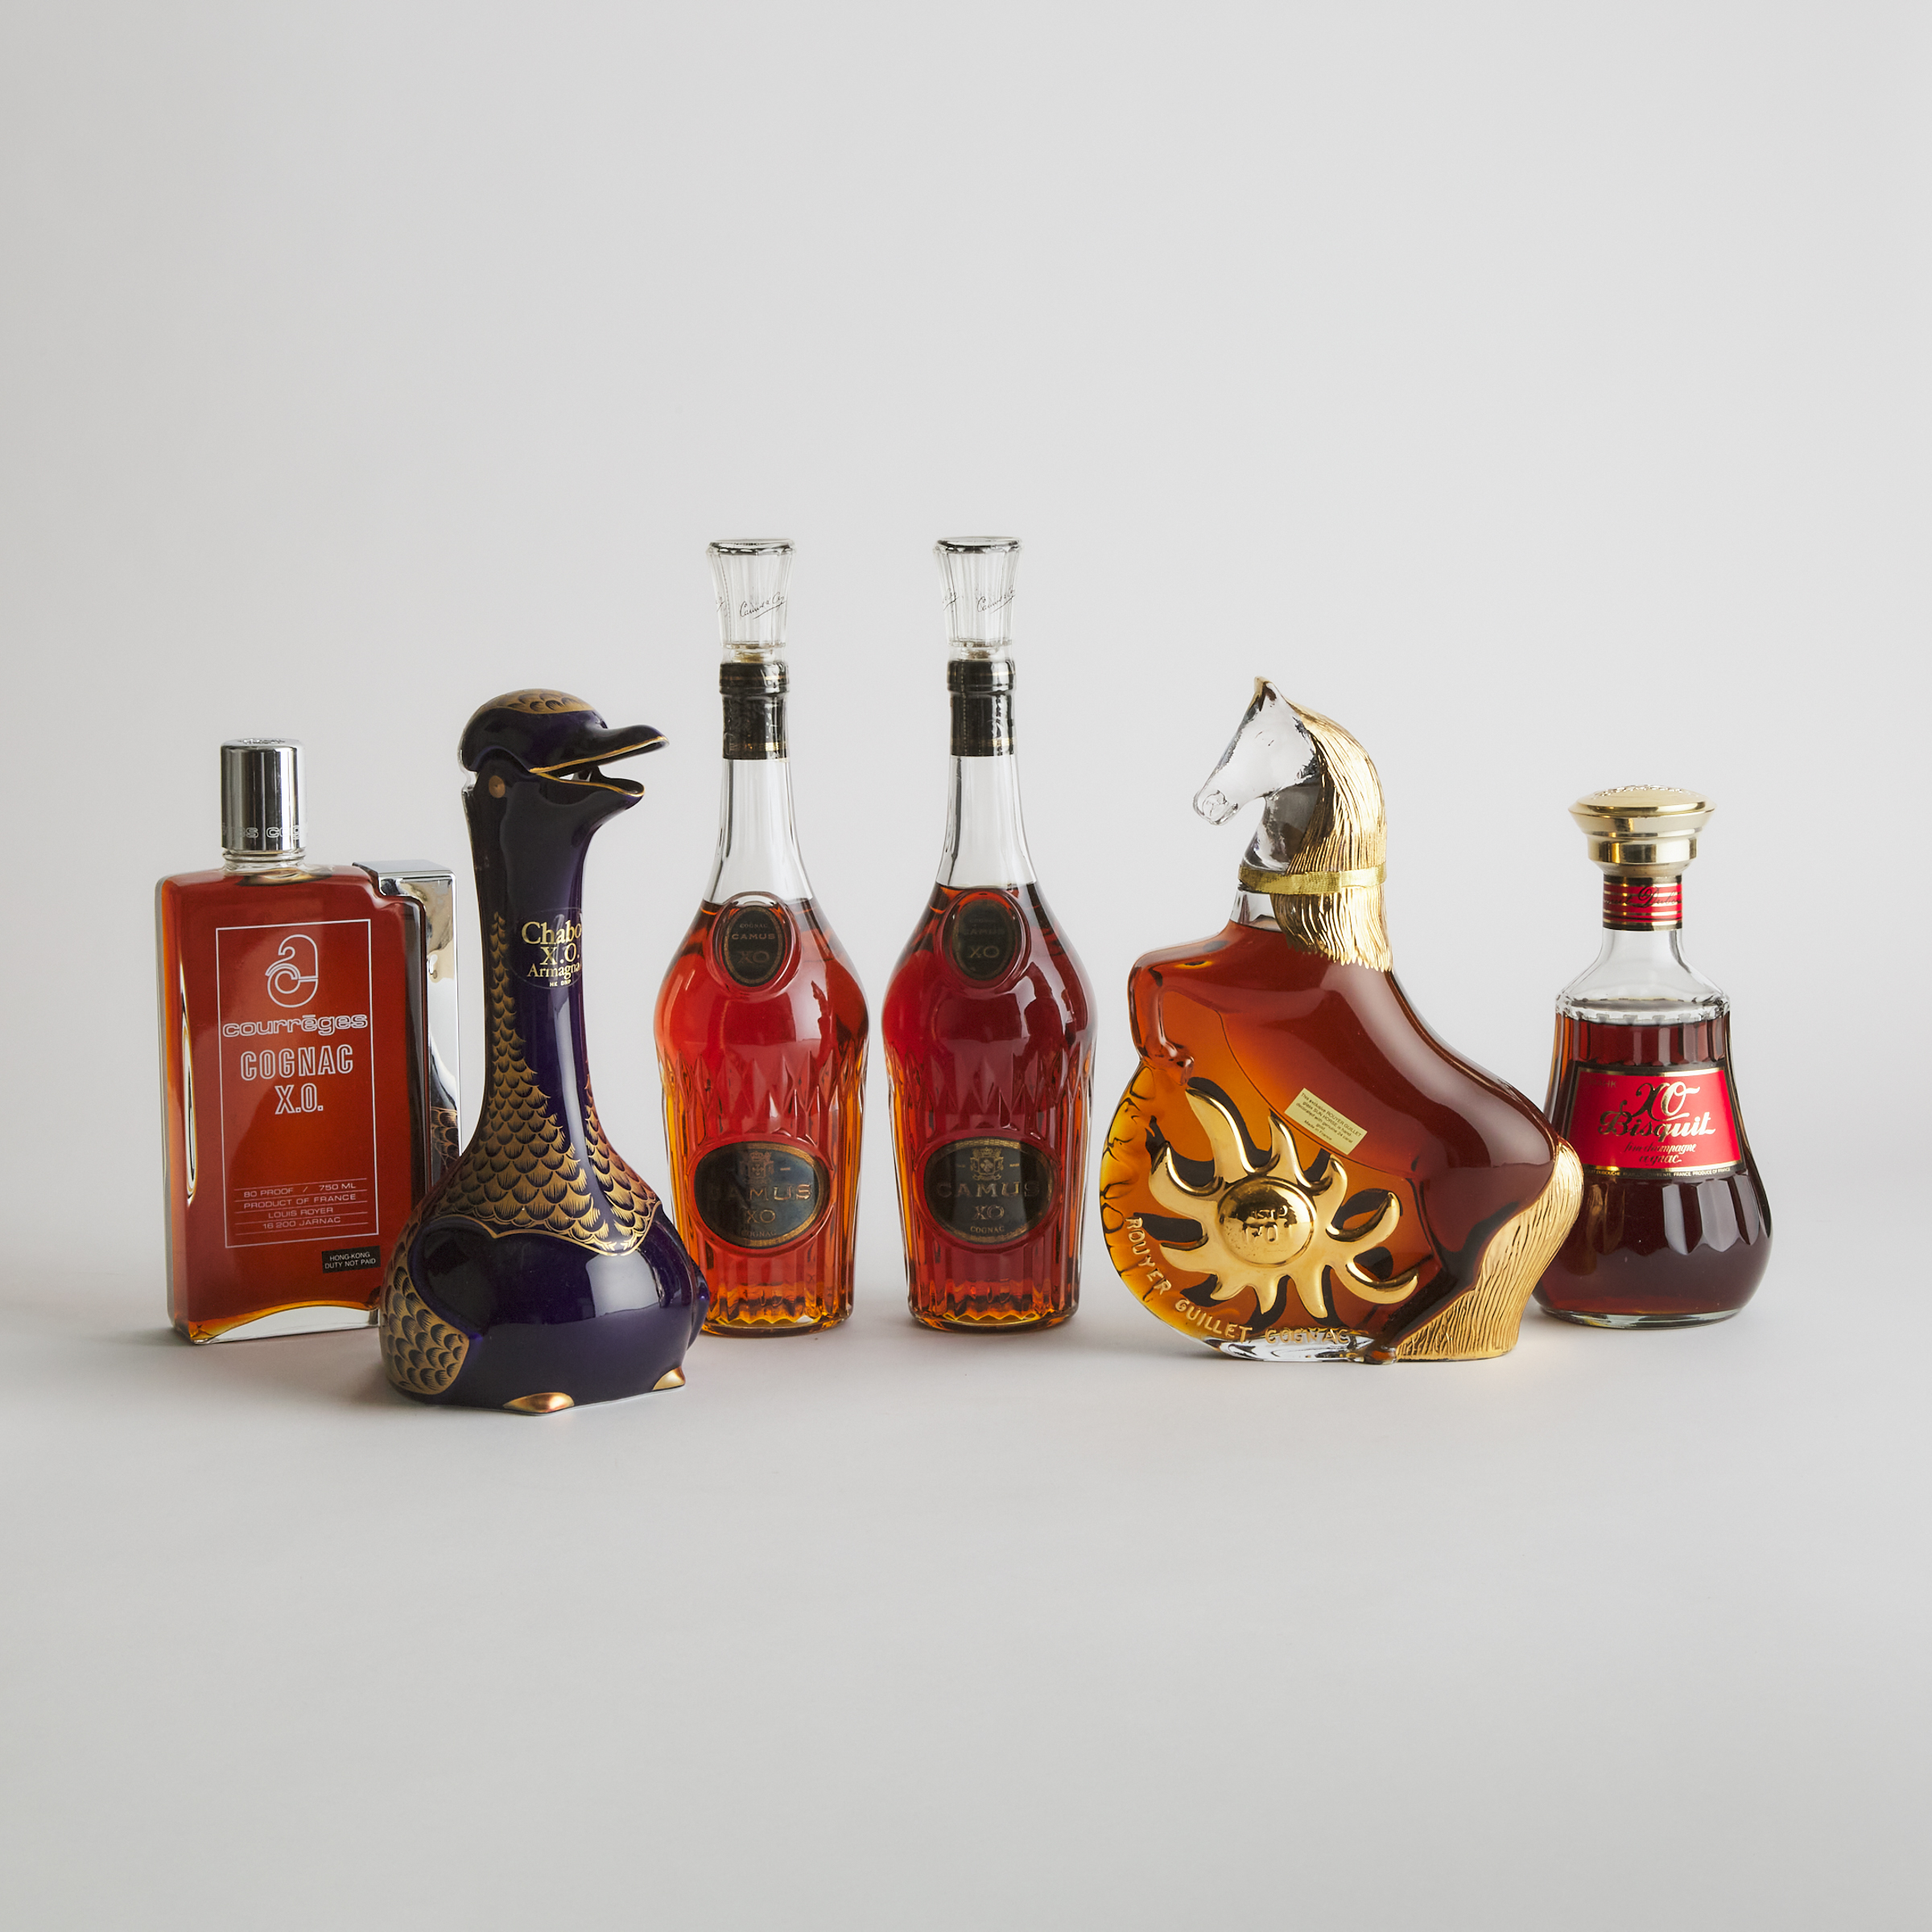 BISQUIT XO FINE CHAMPAGNE COGNAC (ONE 70 CL)
CAMUS XO (ONE 70 CL)
CHABOT ARMAGNAC X.O. (ONE 75 CL)
COURREGES XO (ONE 750 ML)
ROUYER GUILLET COGNAC (ONE 750 ML)